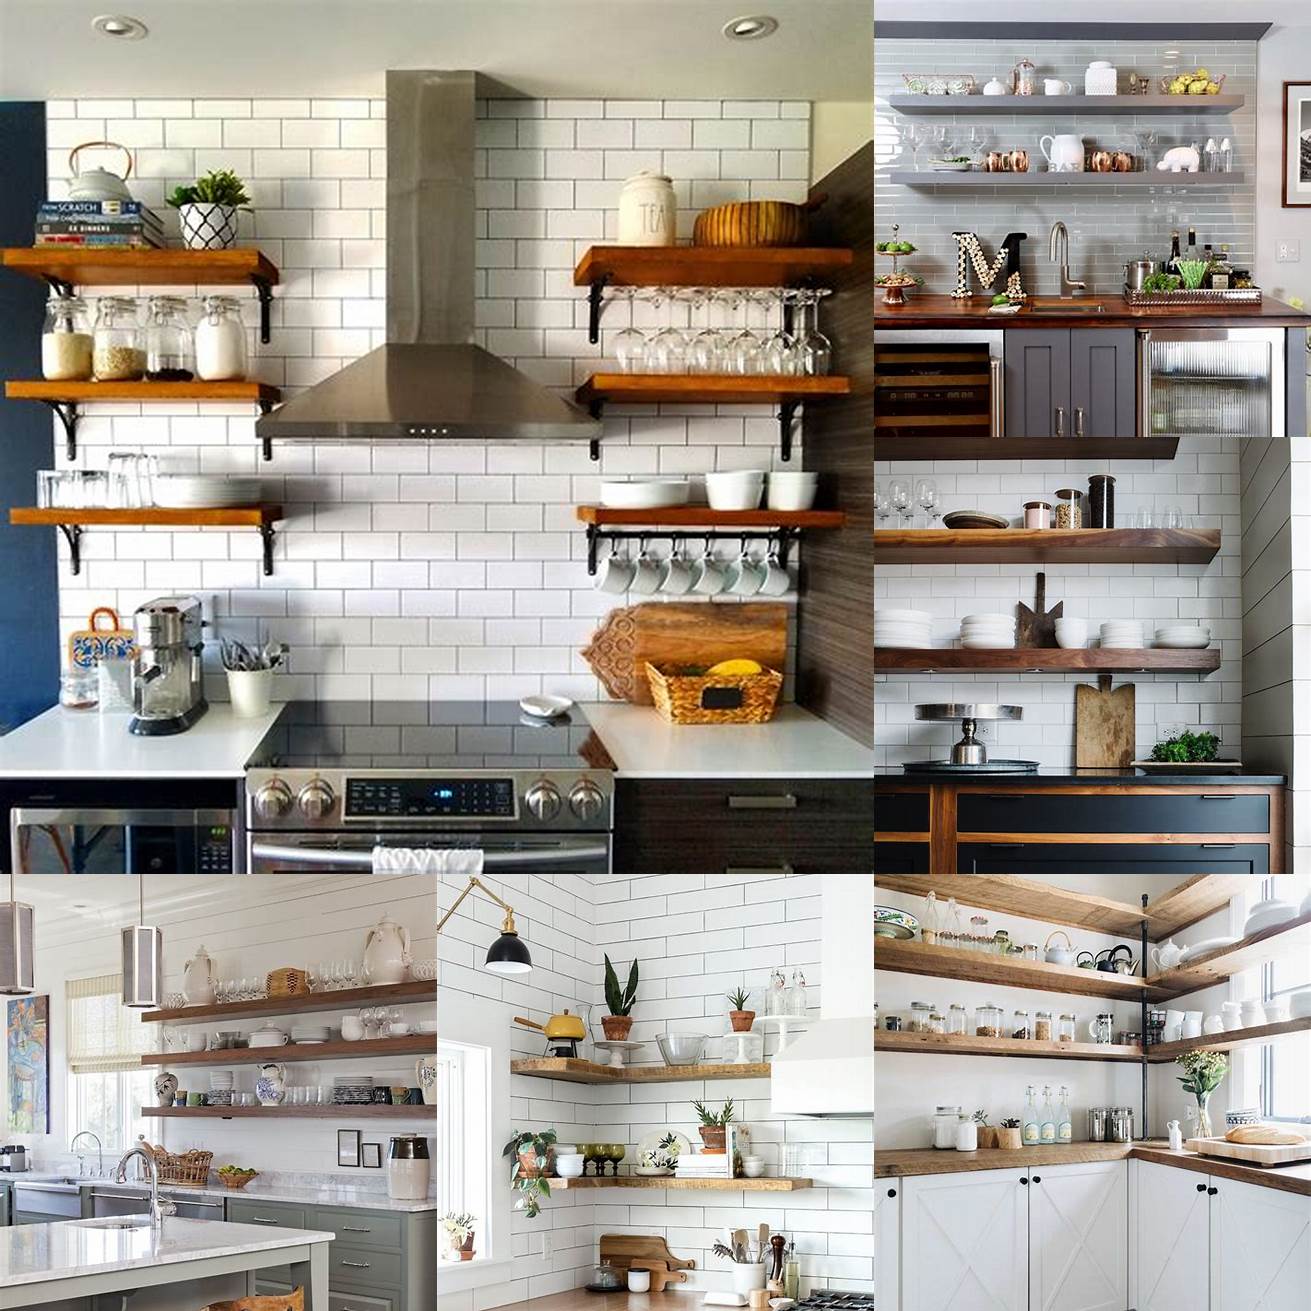 Image of a kitchen with open shelving